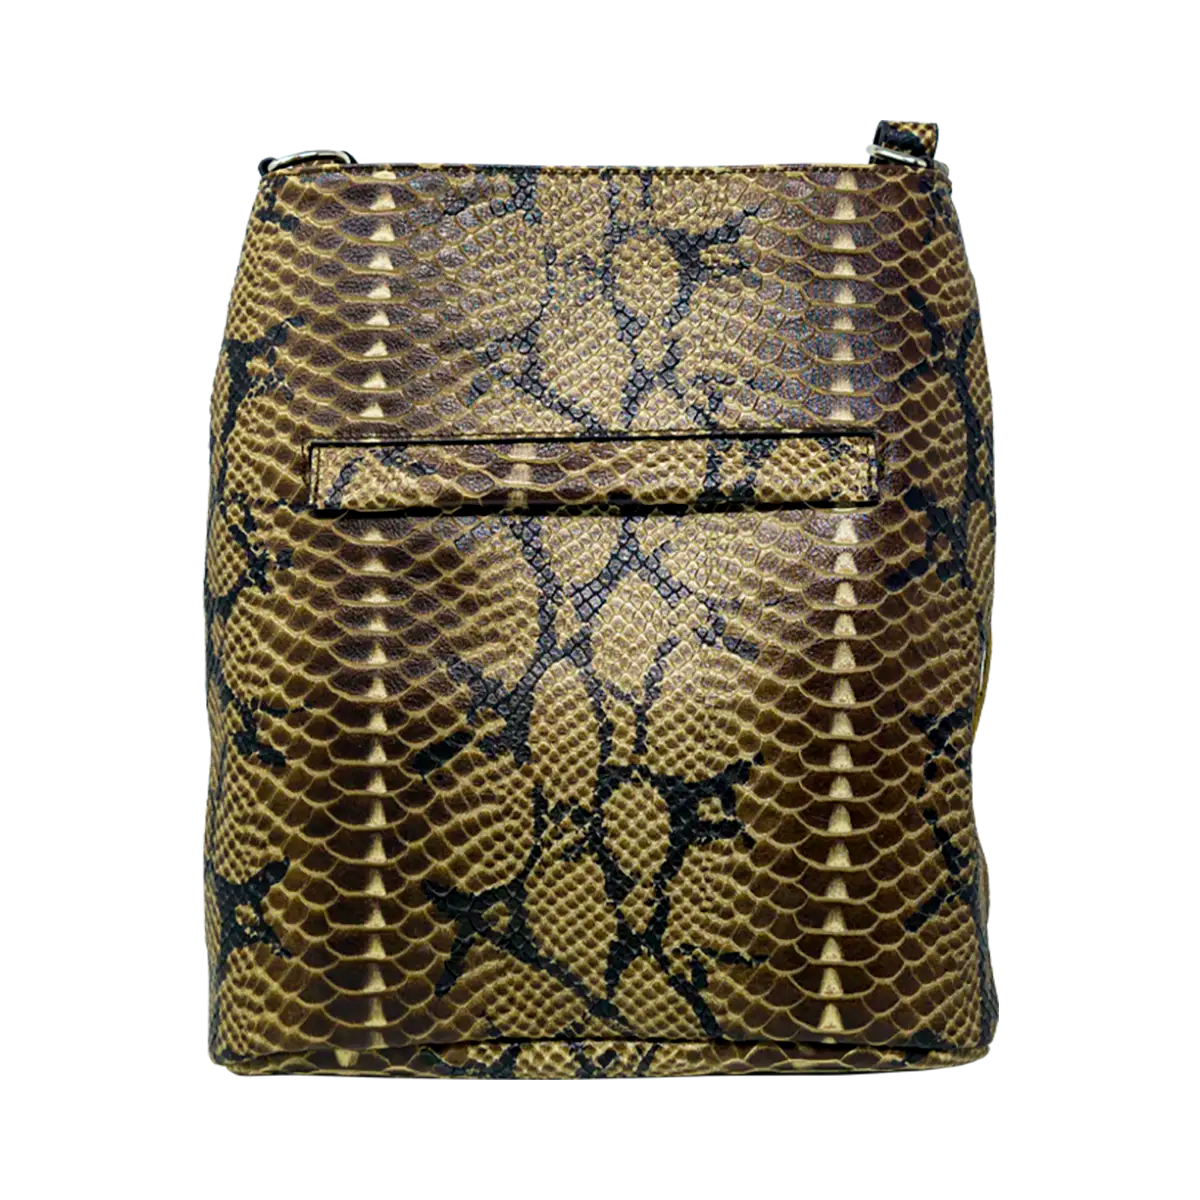 tan print leather shoulder bag with 3 layers of fringe. Fashion accessories, for women in San Diego, CA.